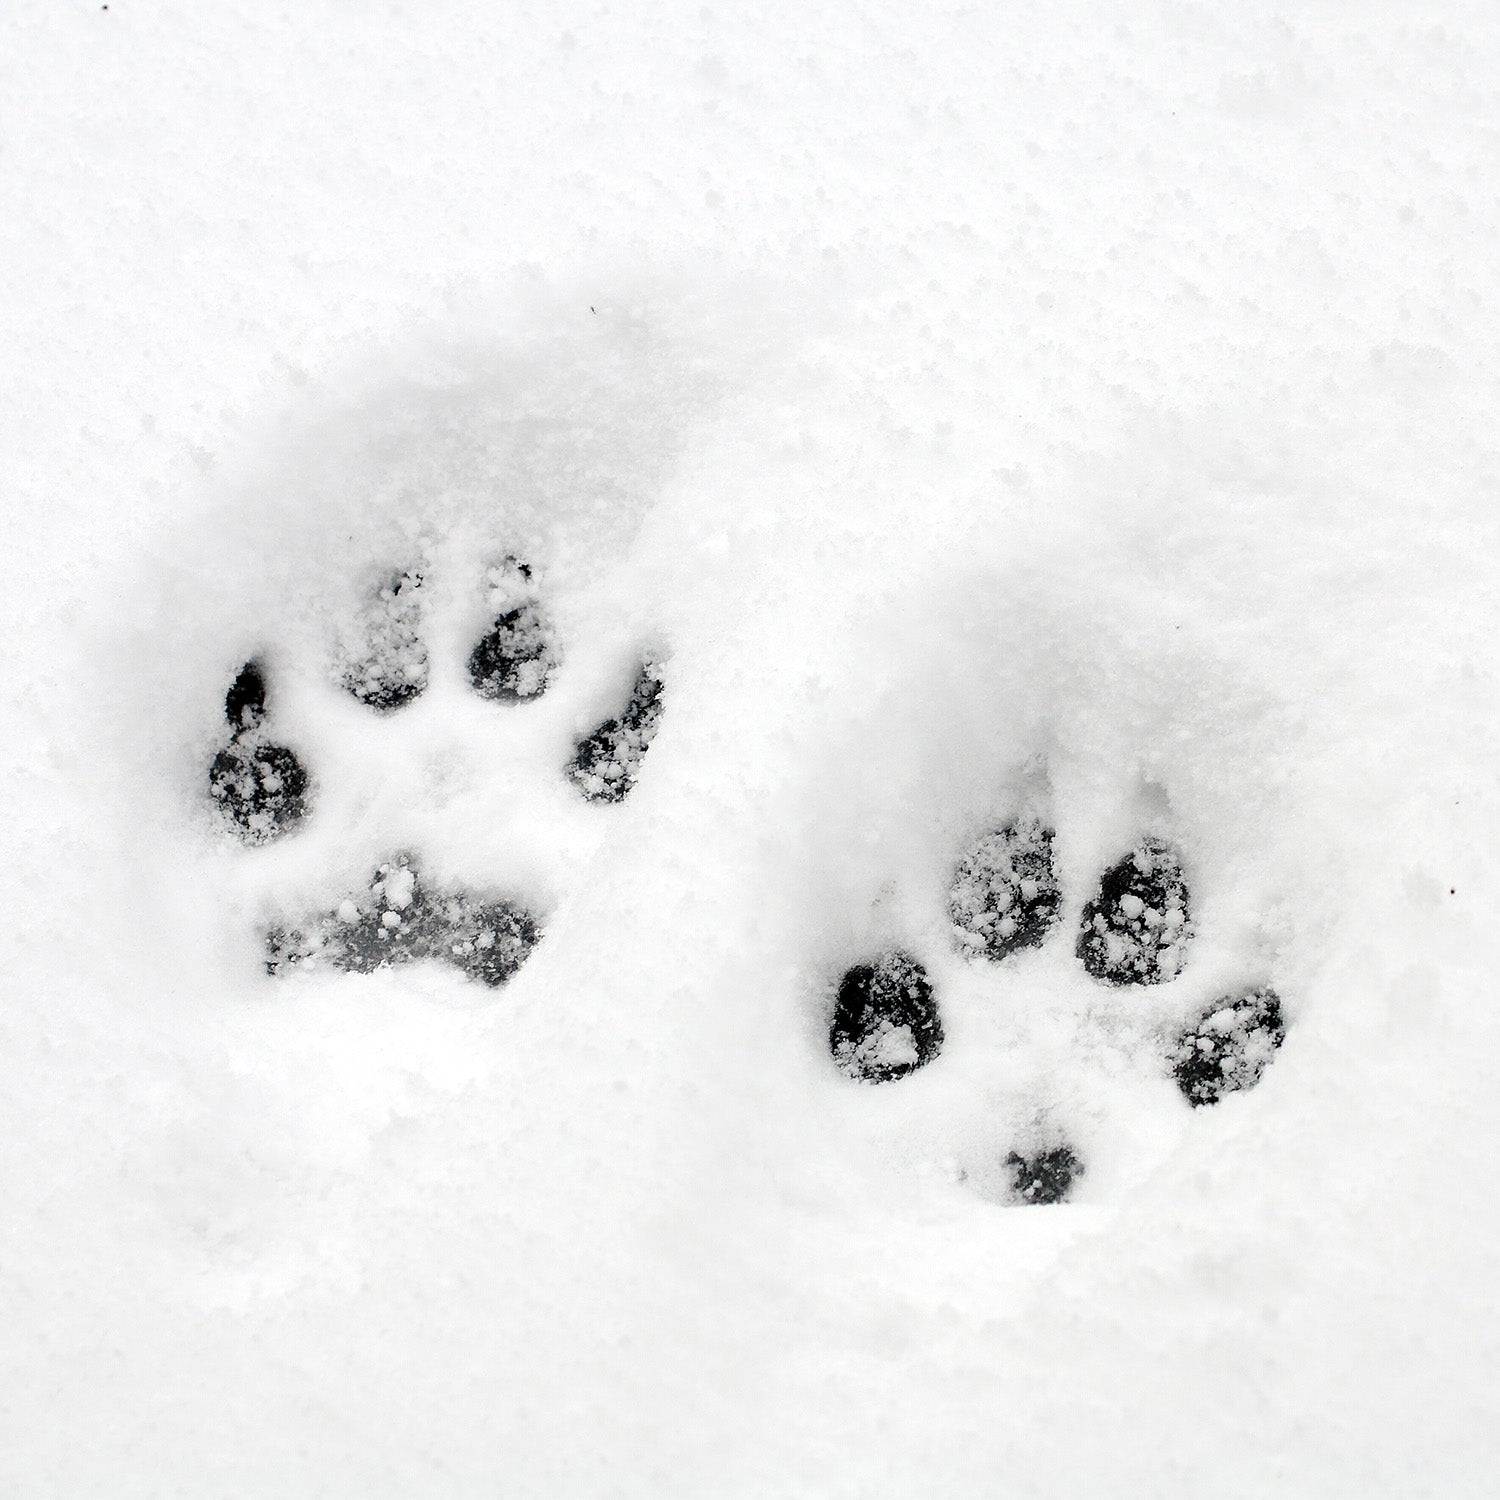 How Can I Protect My Dog's Paws from Salt and Ice Melt?